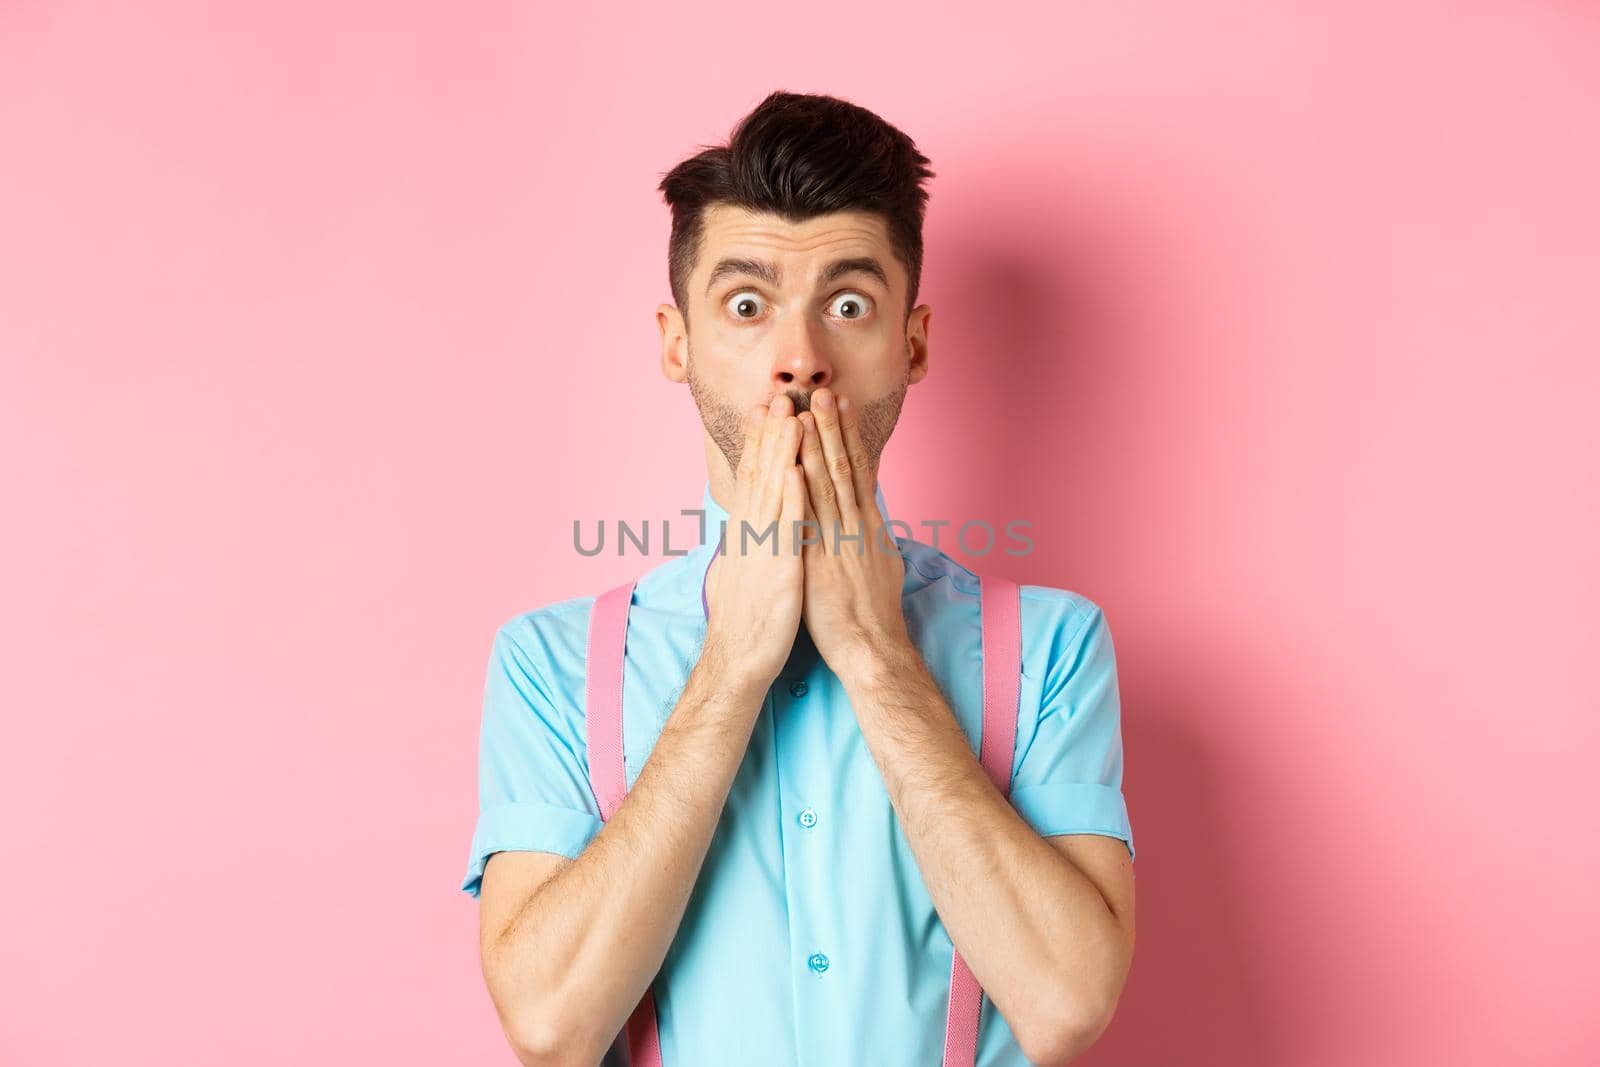 Shocked man looking in startled, covering mouth with hands and staring at camera, standing on pink background.